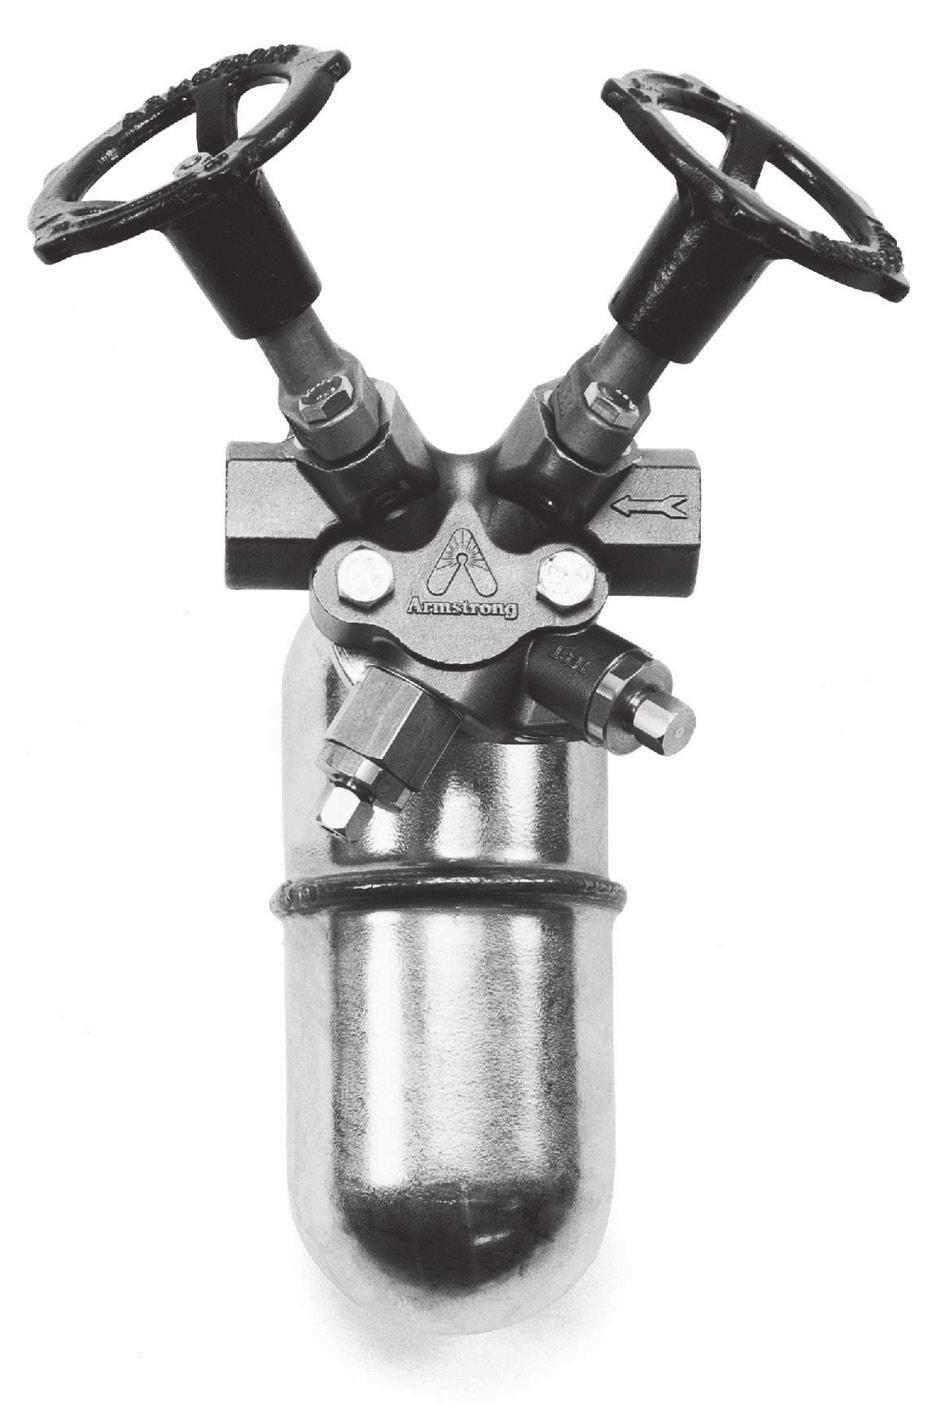 SAFETY, SAVINGS AND SIMPLIFICATION ARMSTRONG 360 CONNECTOR Armstrong 360 Connector enables simple installation of the Armstrong IB Steam Trap into any piping configuration, with little or no repiping.